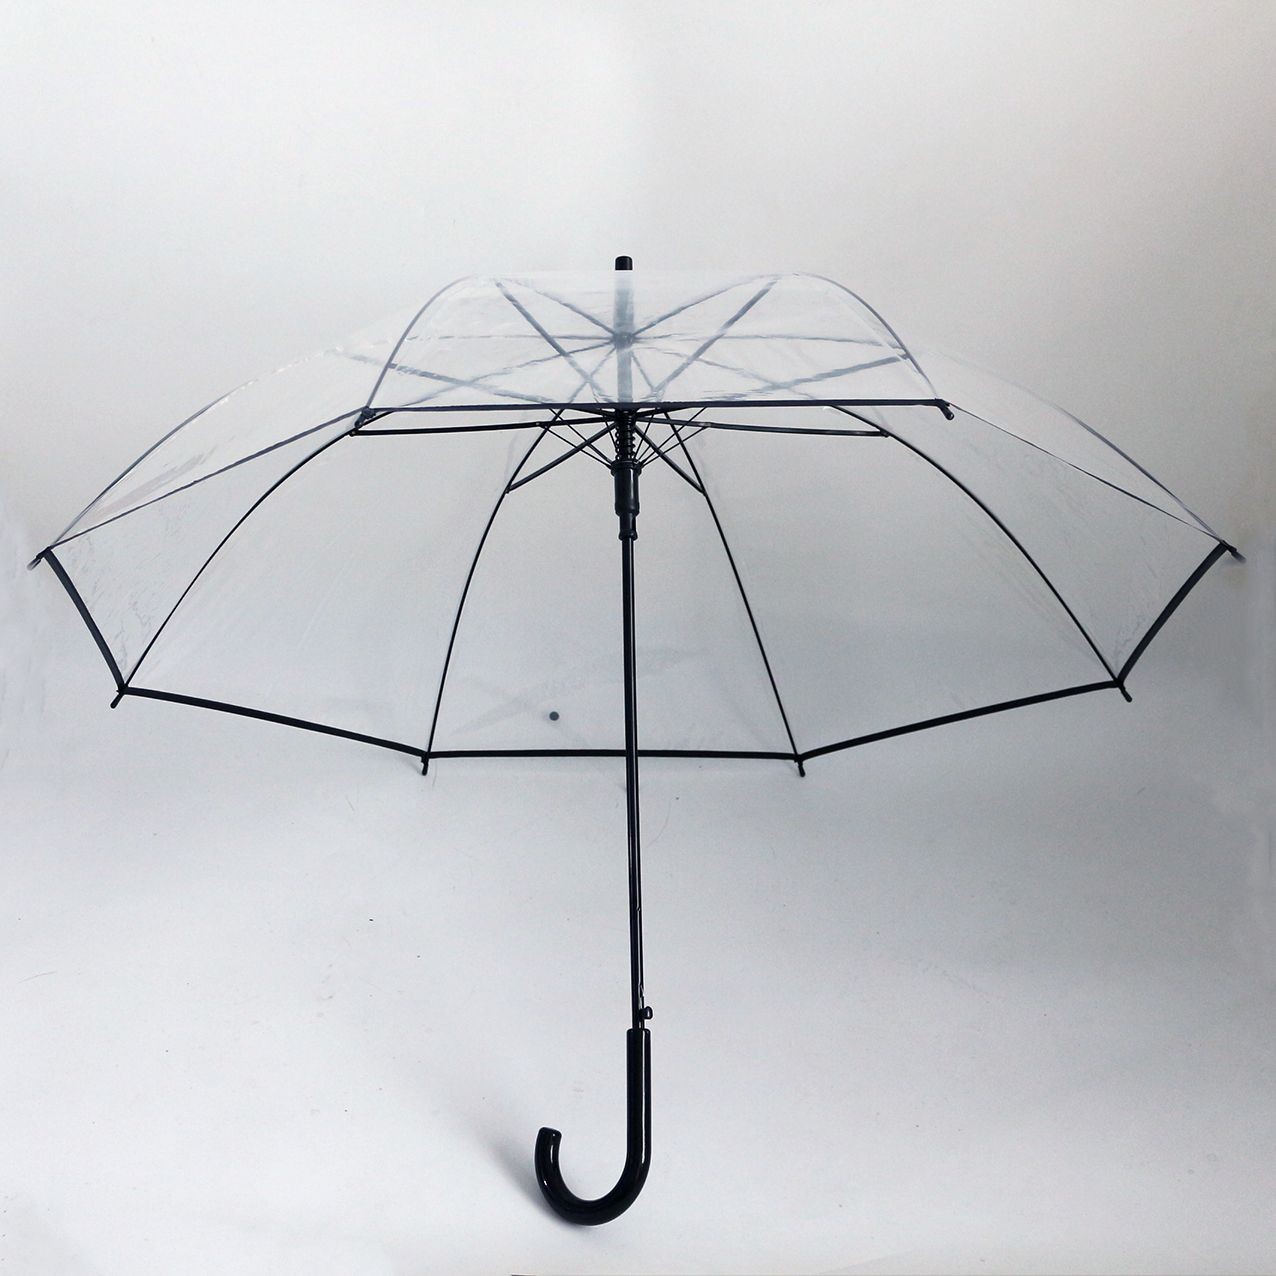 Clear Arched Apolo Rain Umbrellas Transparent Arched Apolo Umbrellas for Girls and Ladies with Long Handle